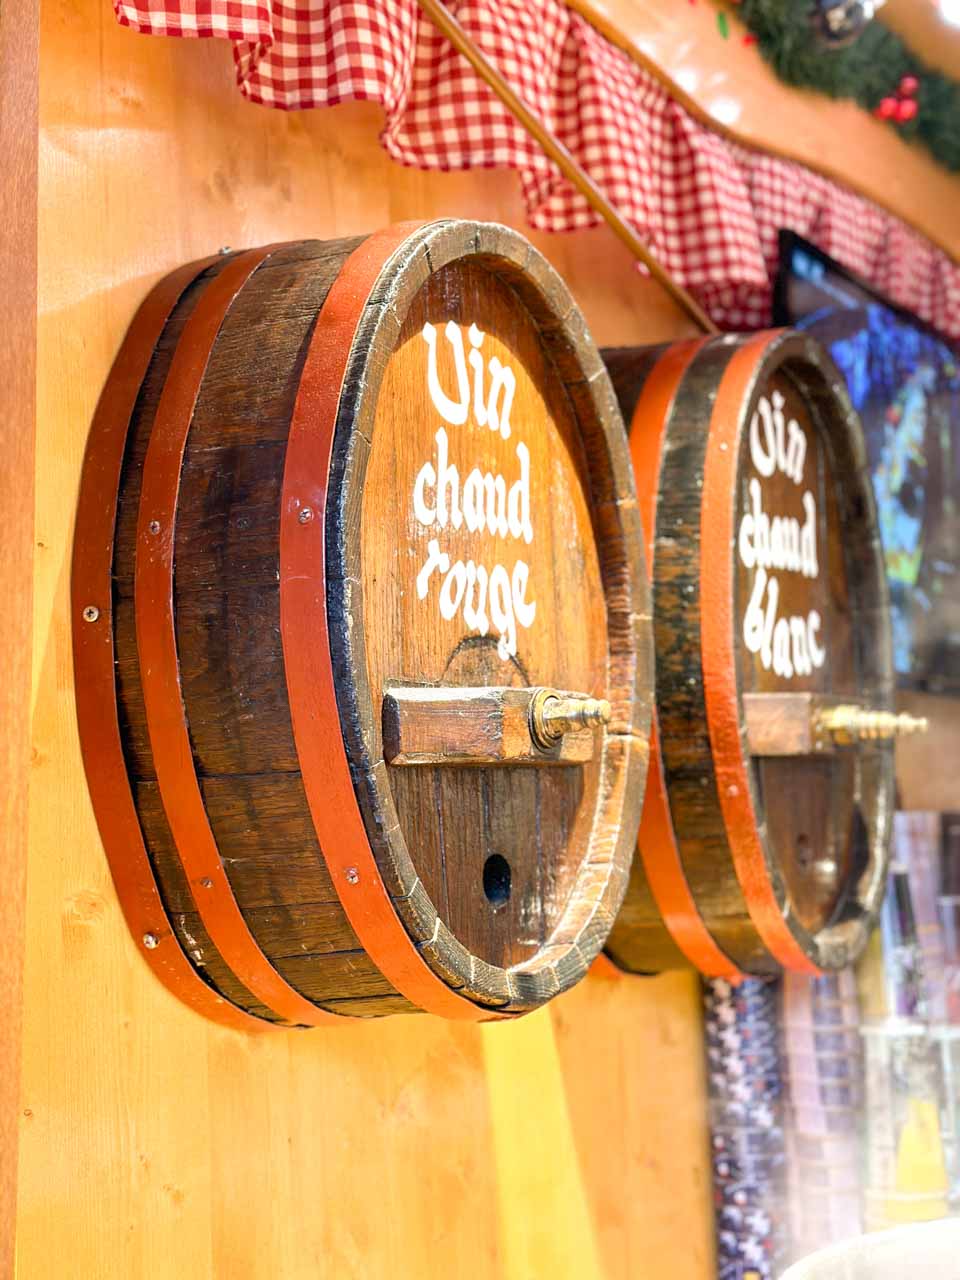 Wooden barrels labelled Vin chaud rouge and Vin chaud blanc at the Place du Château Christmas market in Strasbourg